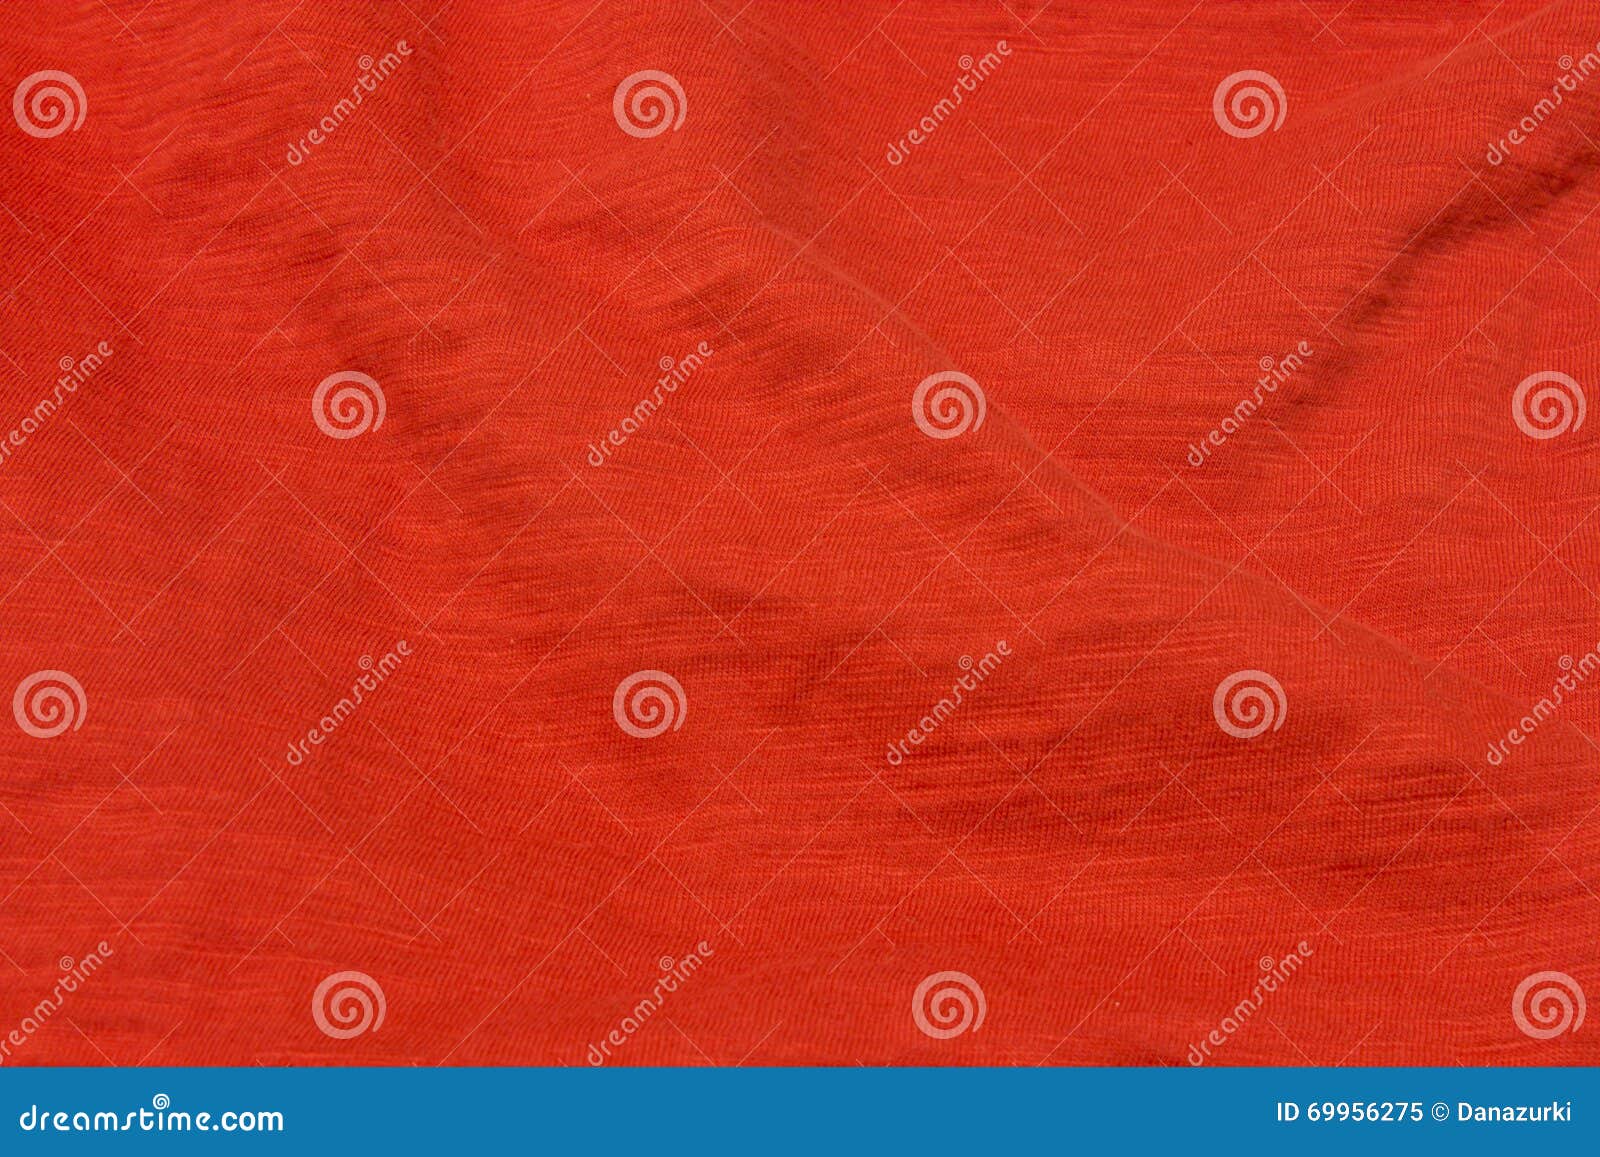 Bright Red Fabric Background Stock Image - Image of sewing, abstract ...